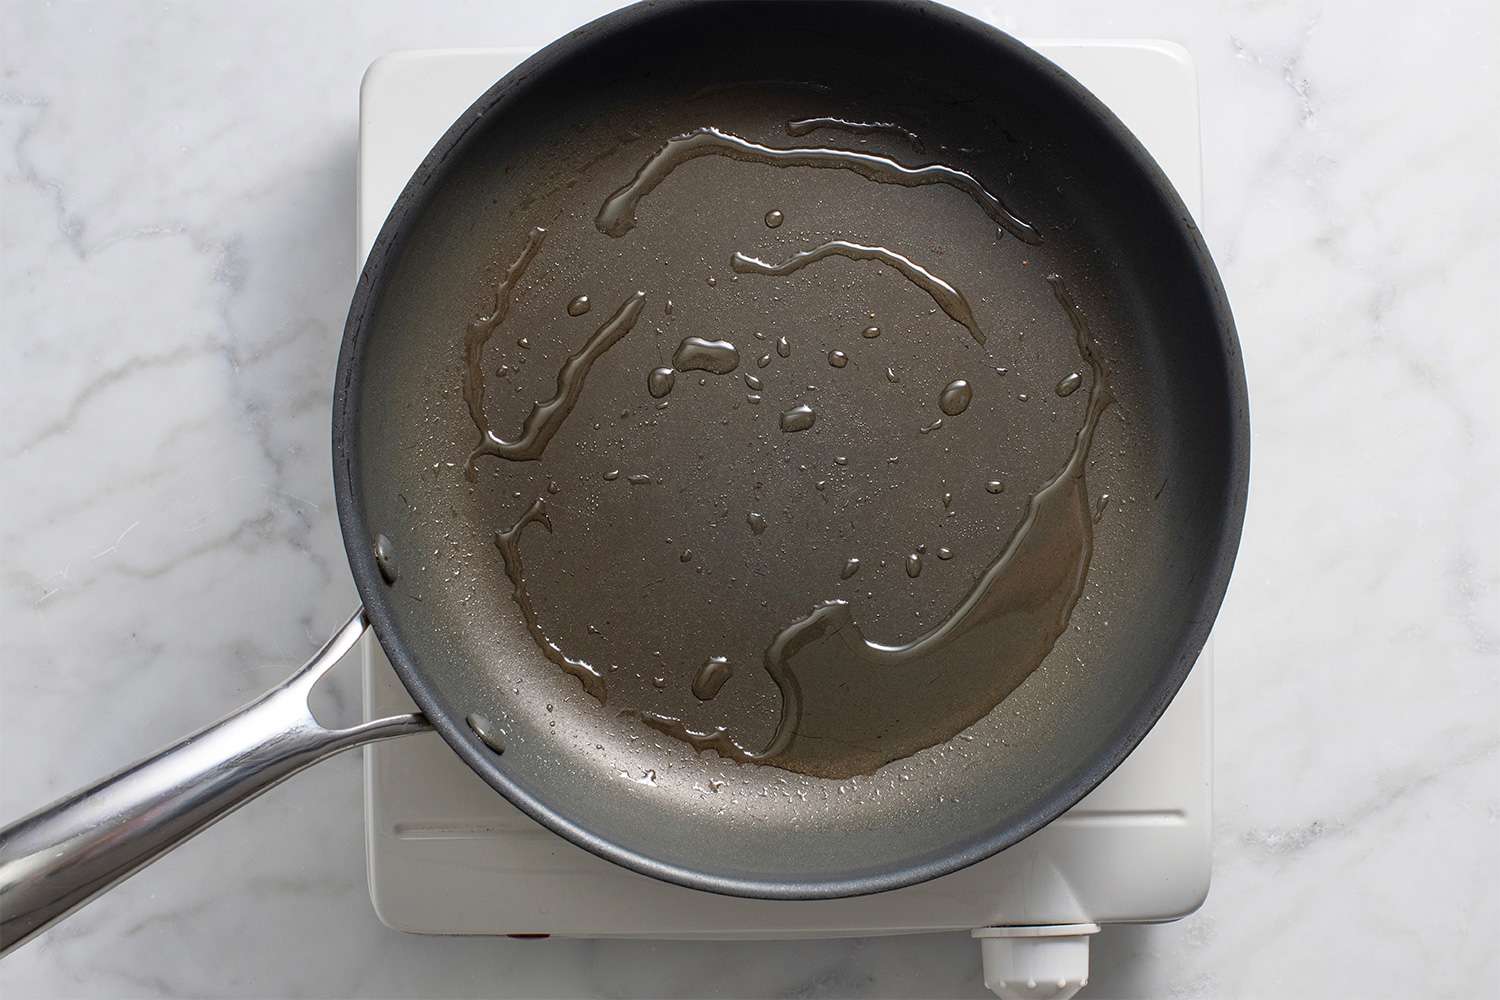 Oil in a pan on a burner 